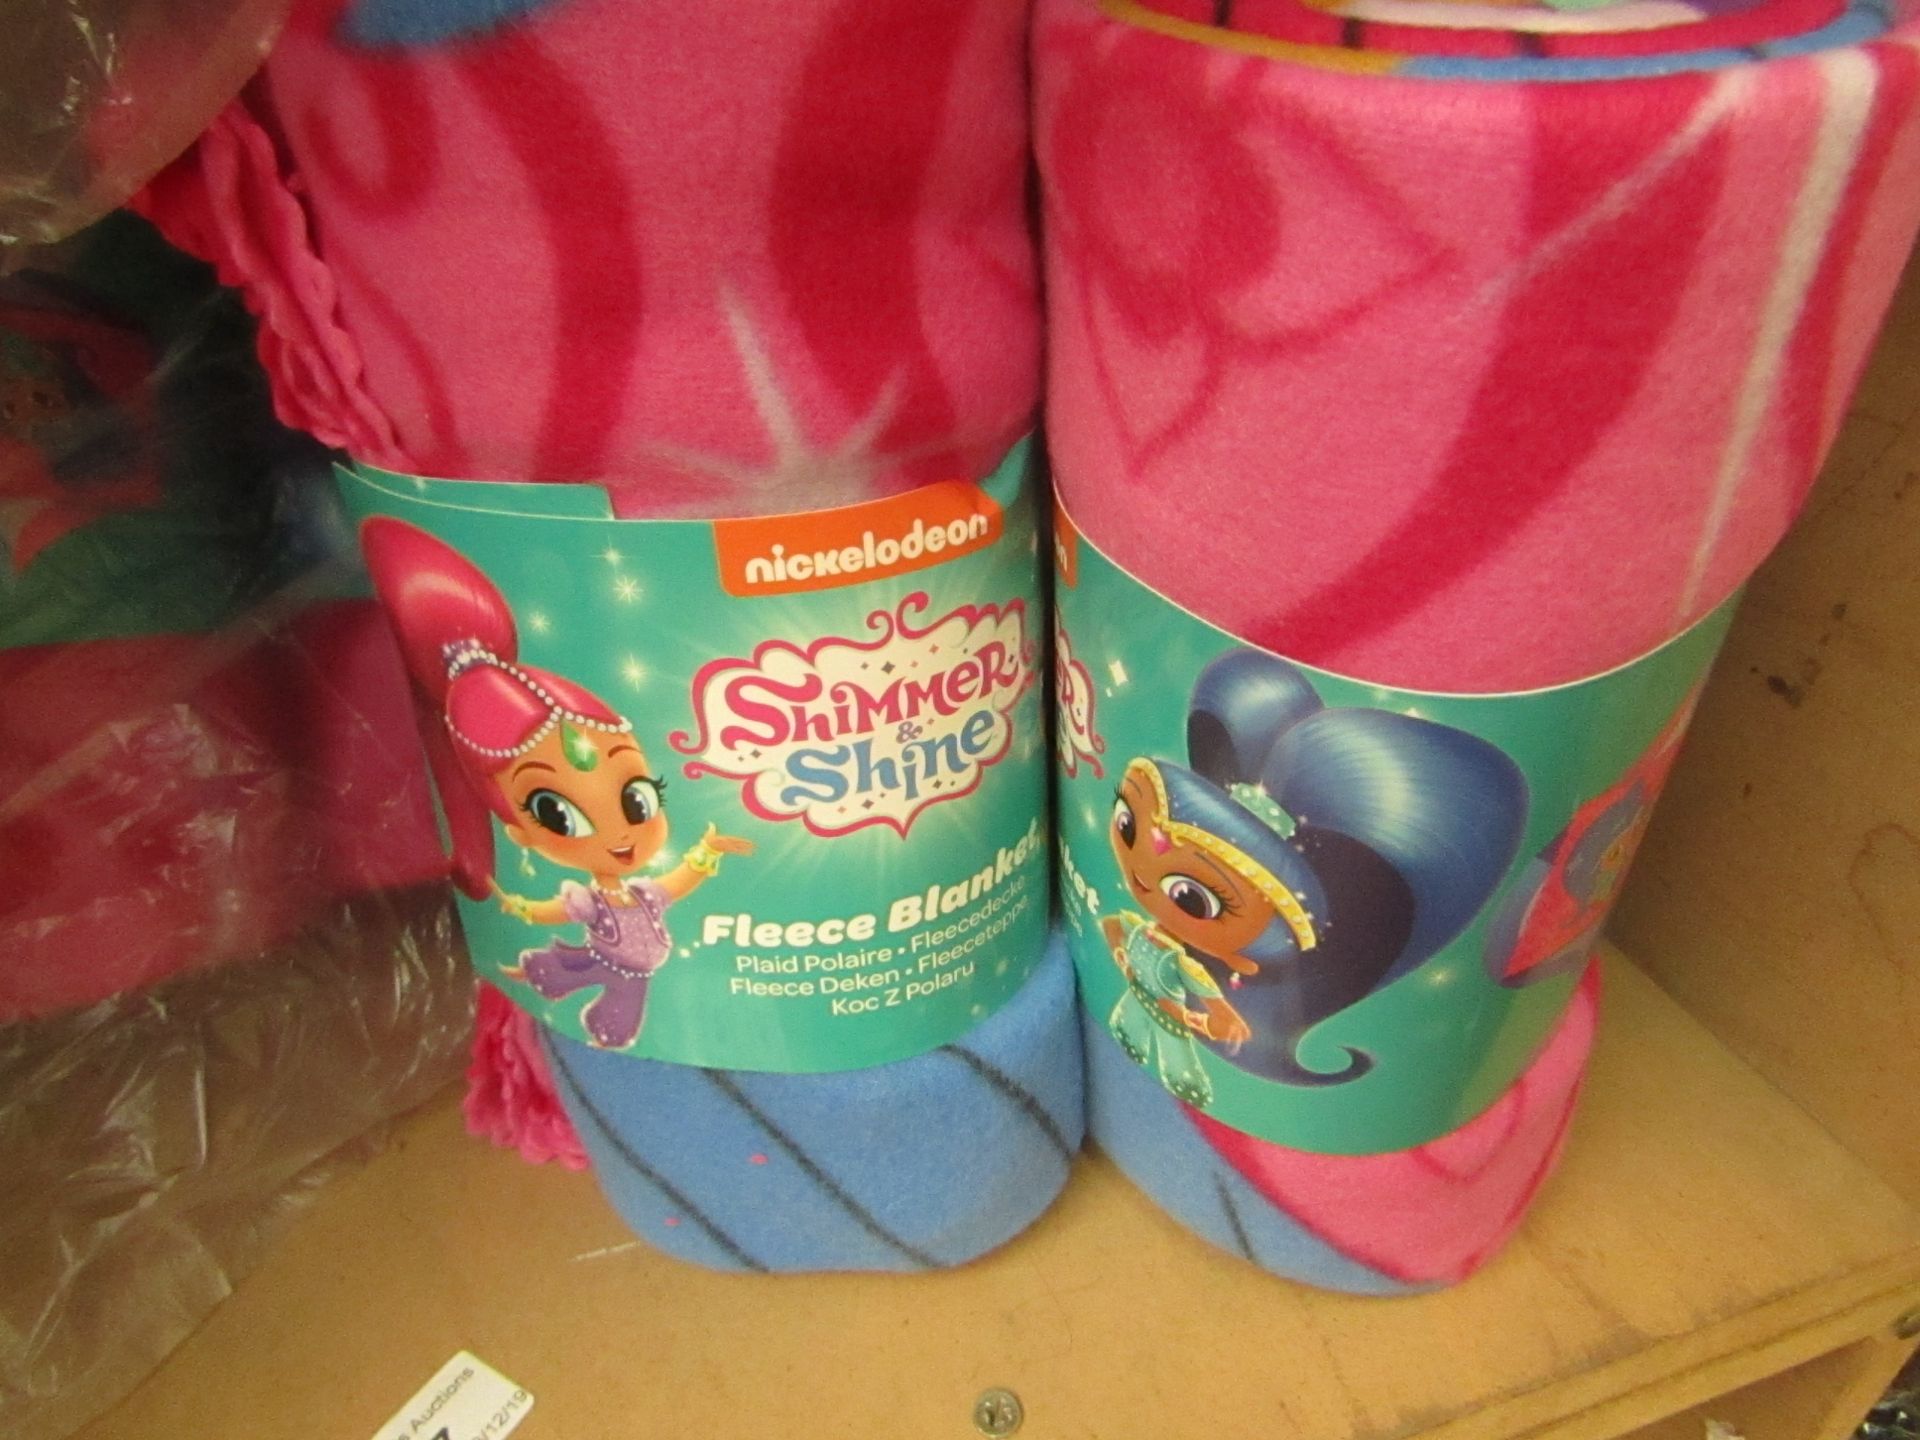 Nickelodeon Shimmer Shine Fleece Blanket. New with Tags. Ideal Stocking filler